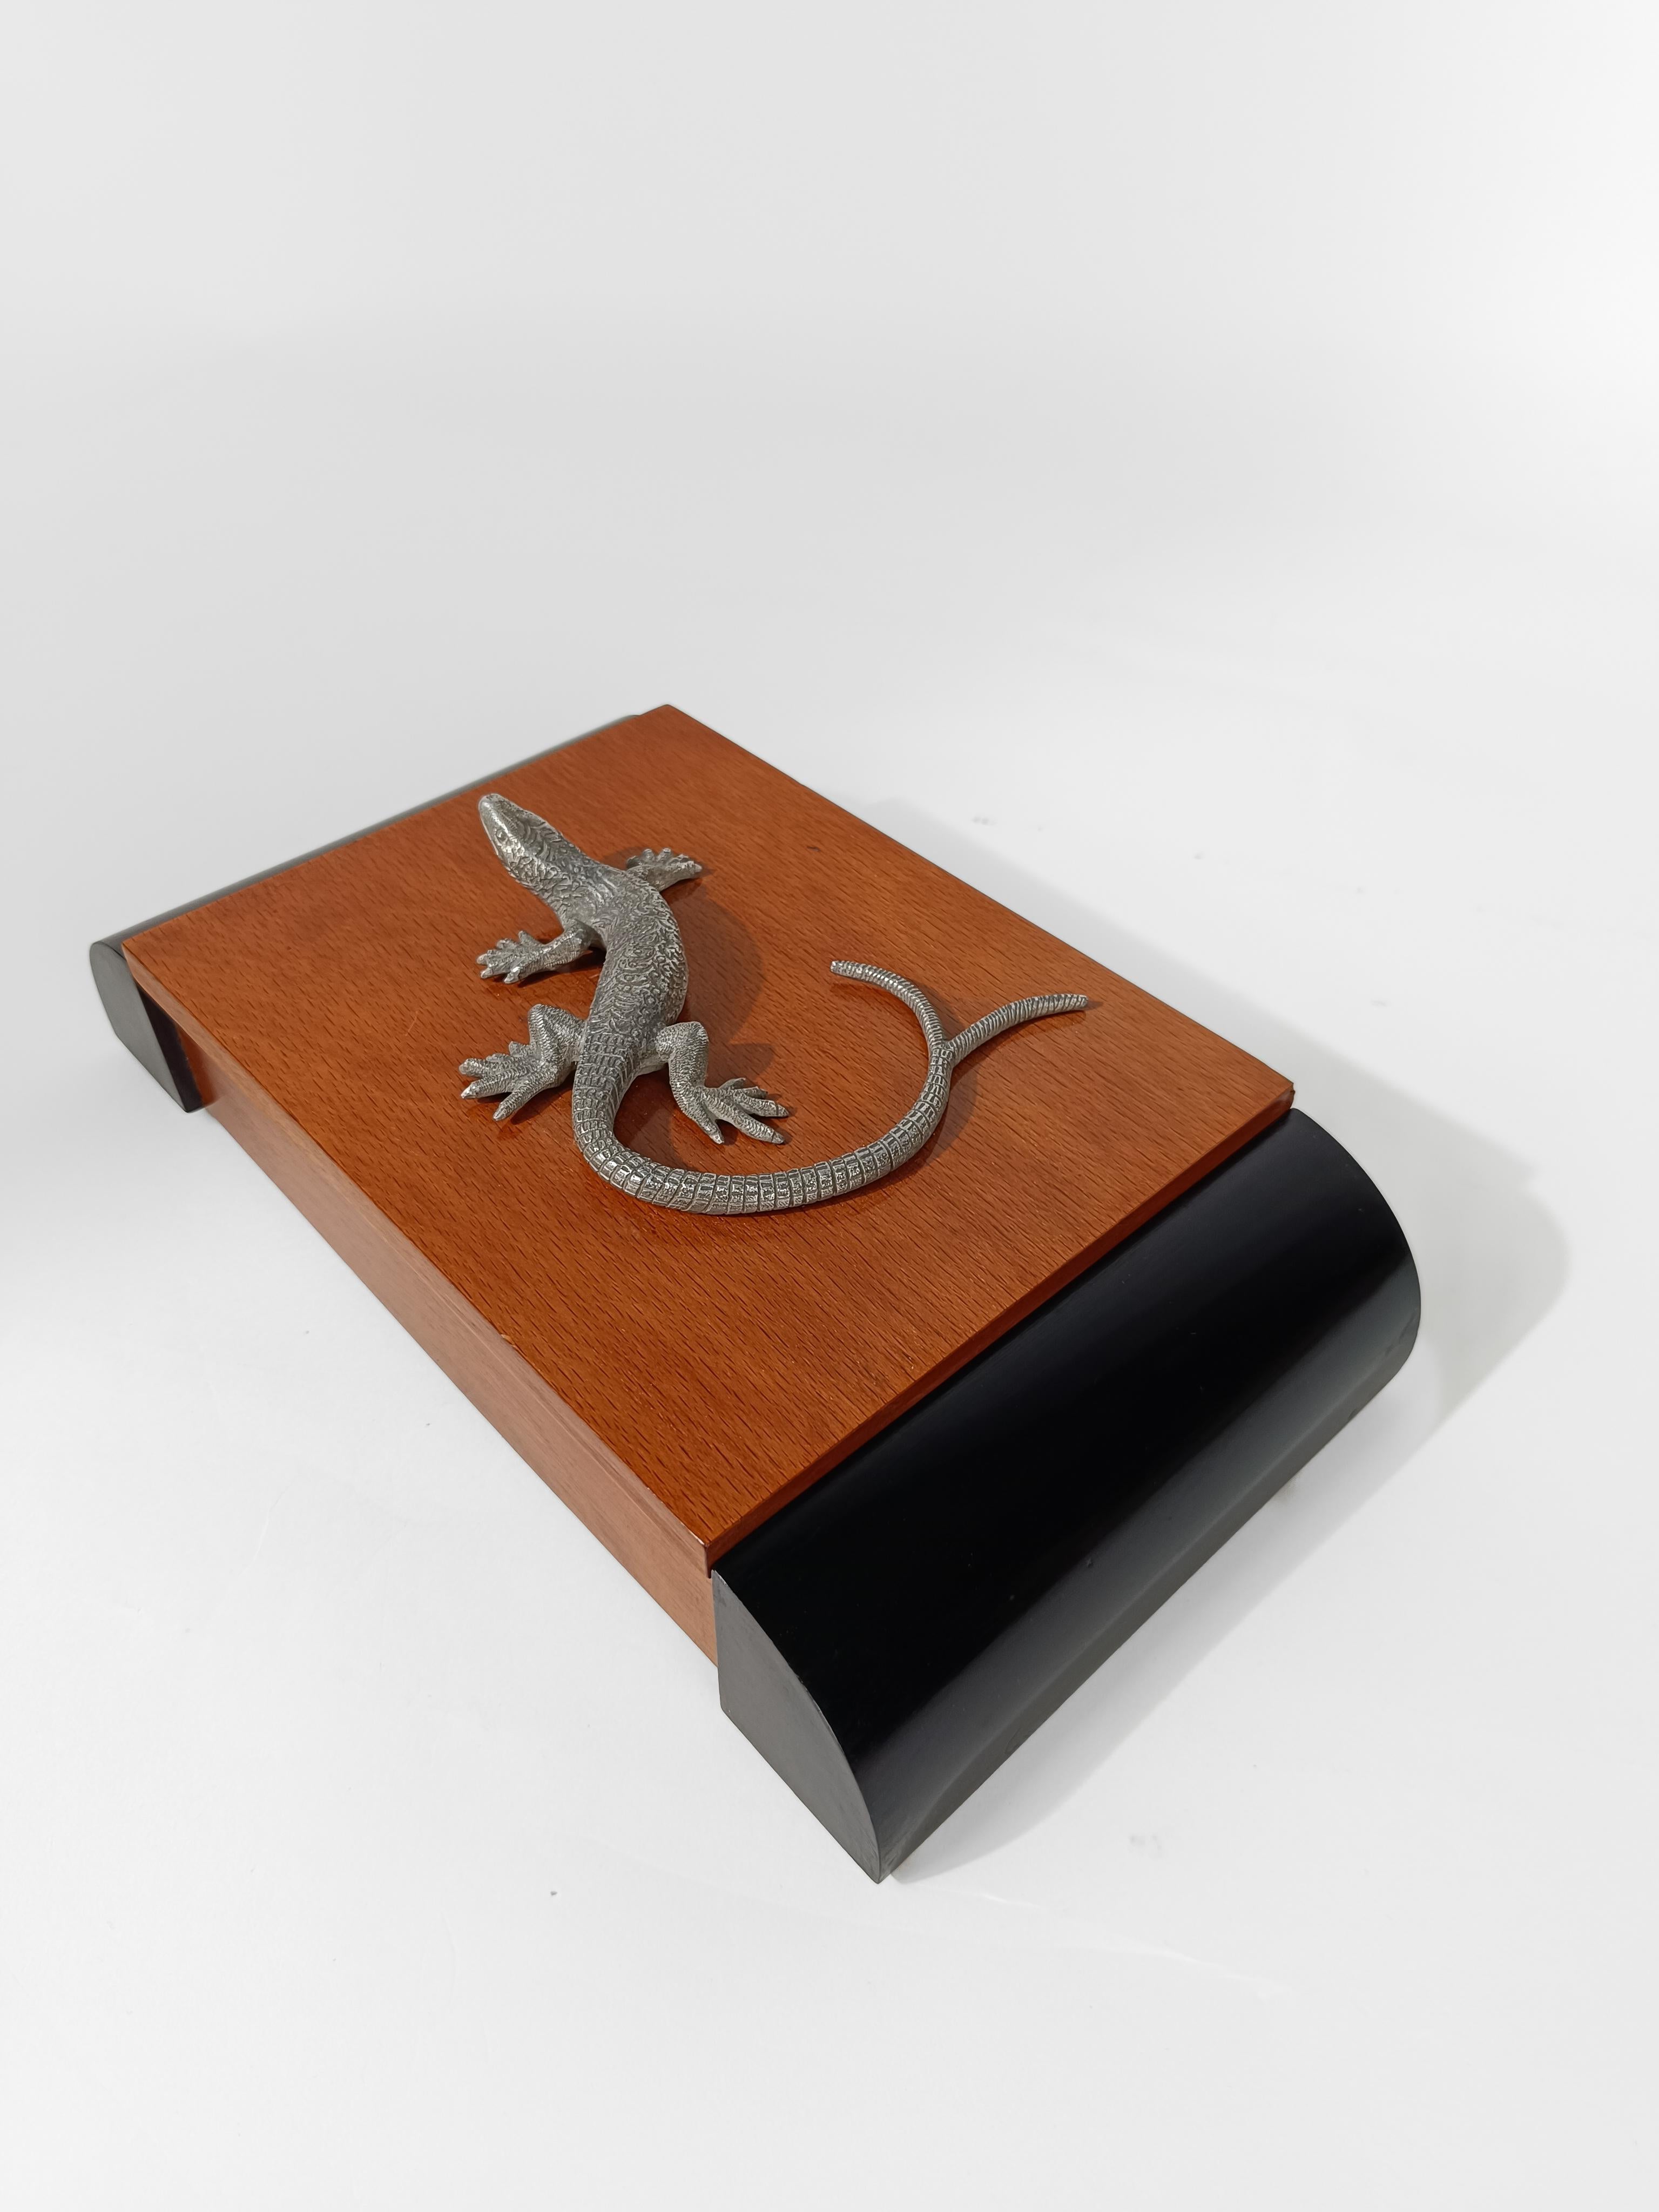 Art Deco wooden Box decorated with a Silver Tone Metal Lizard-shaped Handle For Sale 12